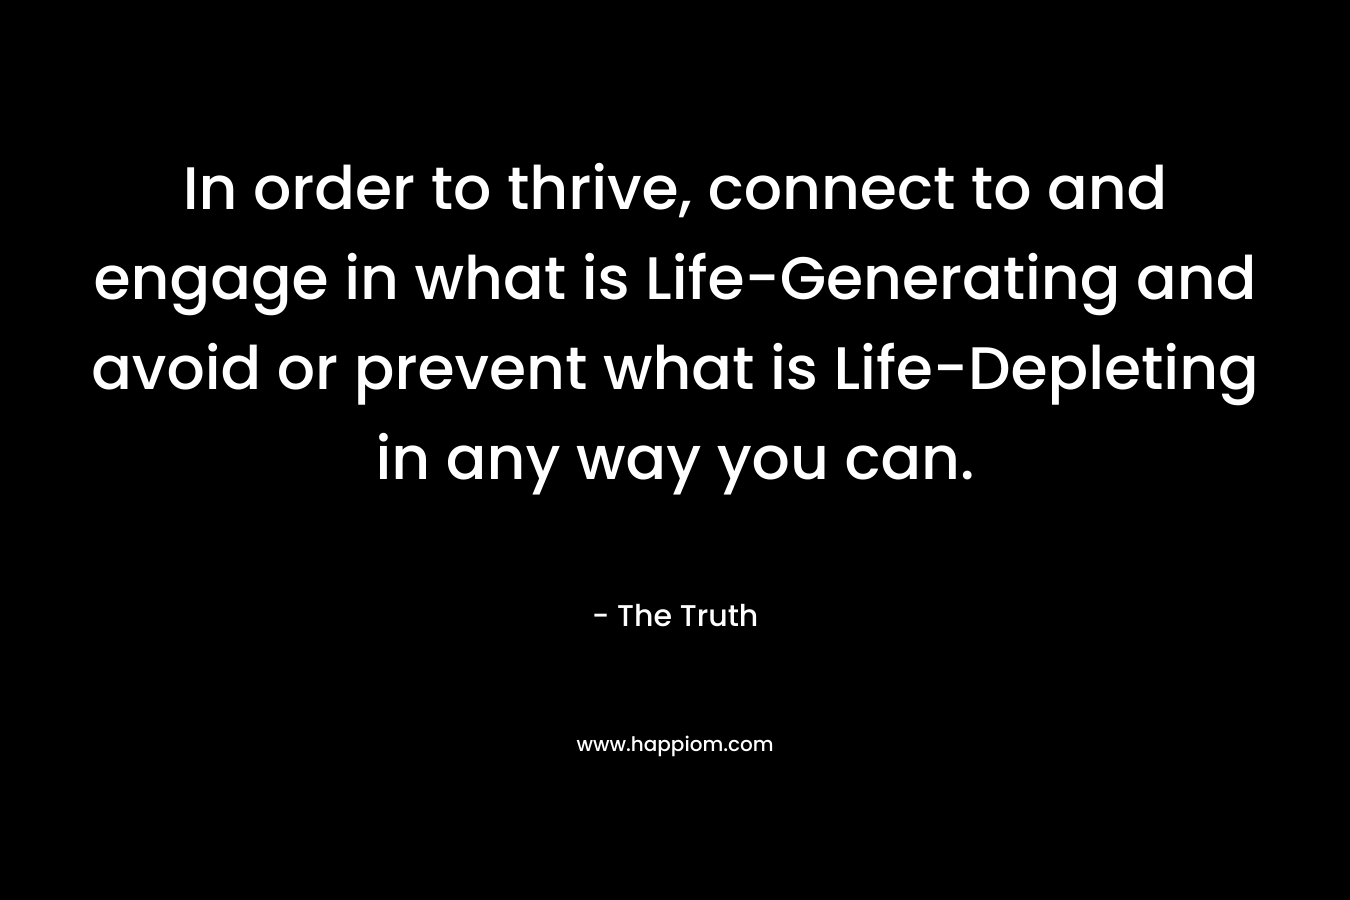 In order to thrive, connect to and engage in what is Life-Generating and avoid or prevent what is Life-Depleting in any way you can.